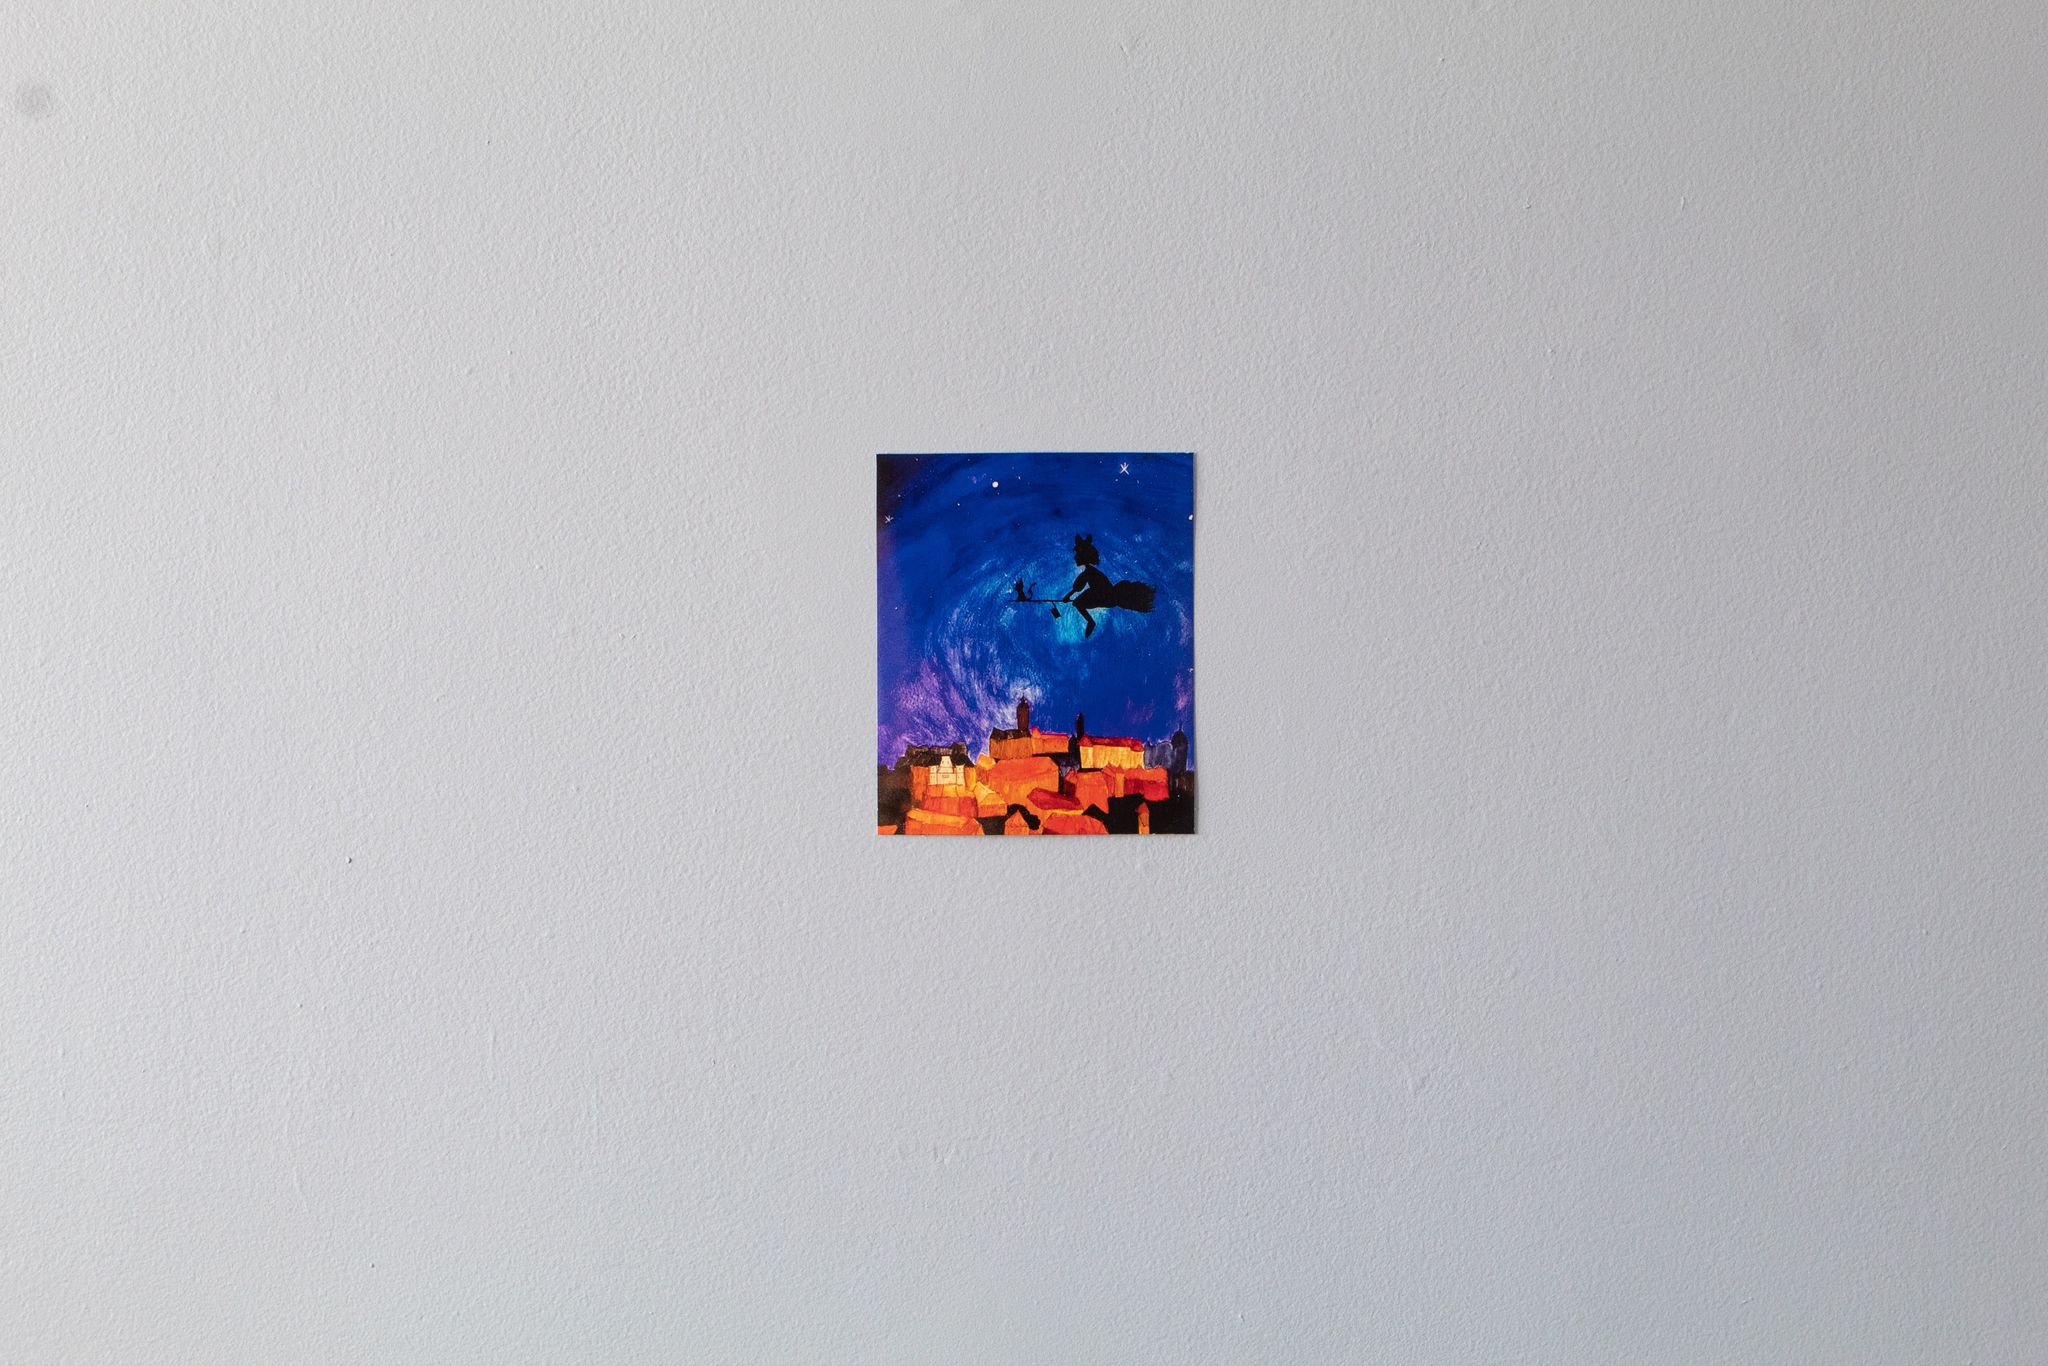 Product image of "A Magical Night" print hung up on a white wall seen at a distance